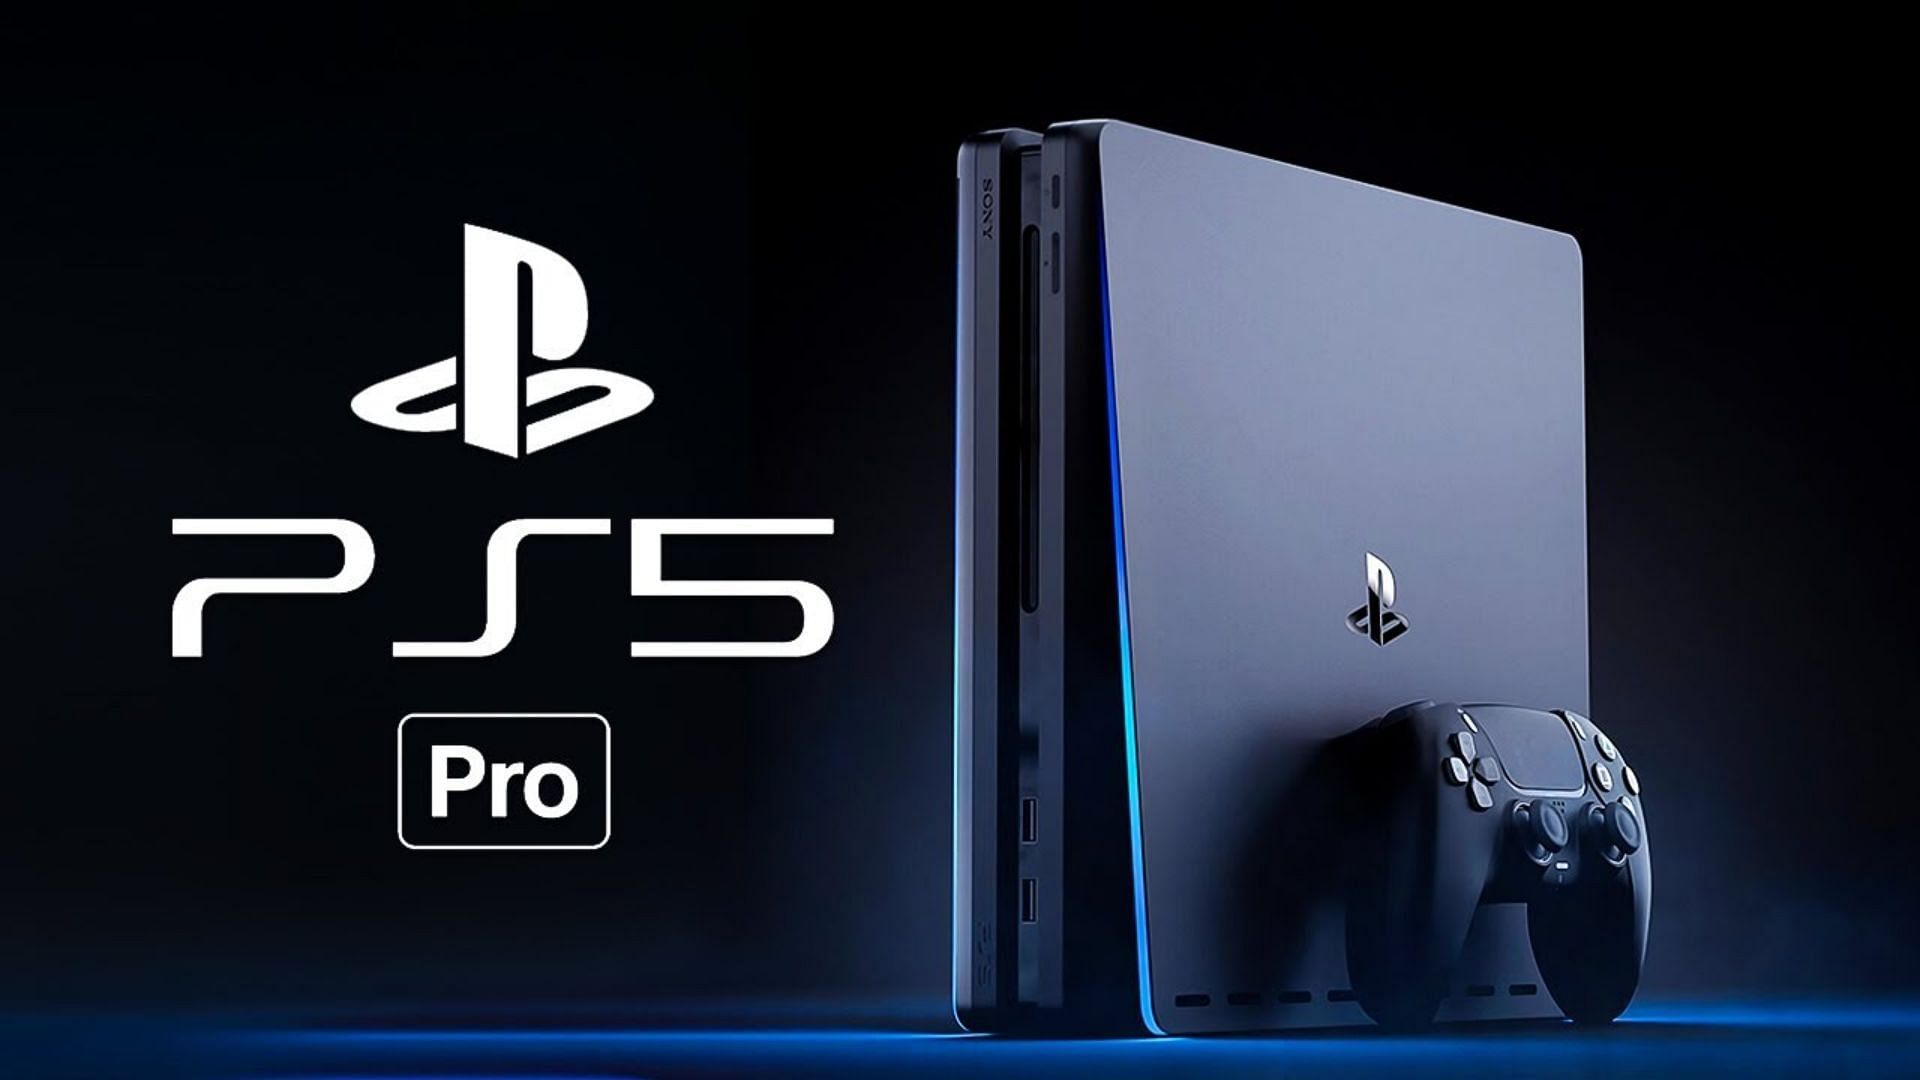 PlayStation 5 Pro: News and Expected Price, Release Date, Specs